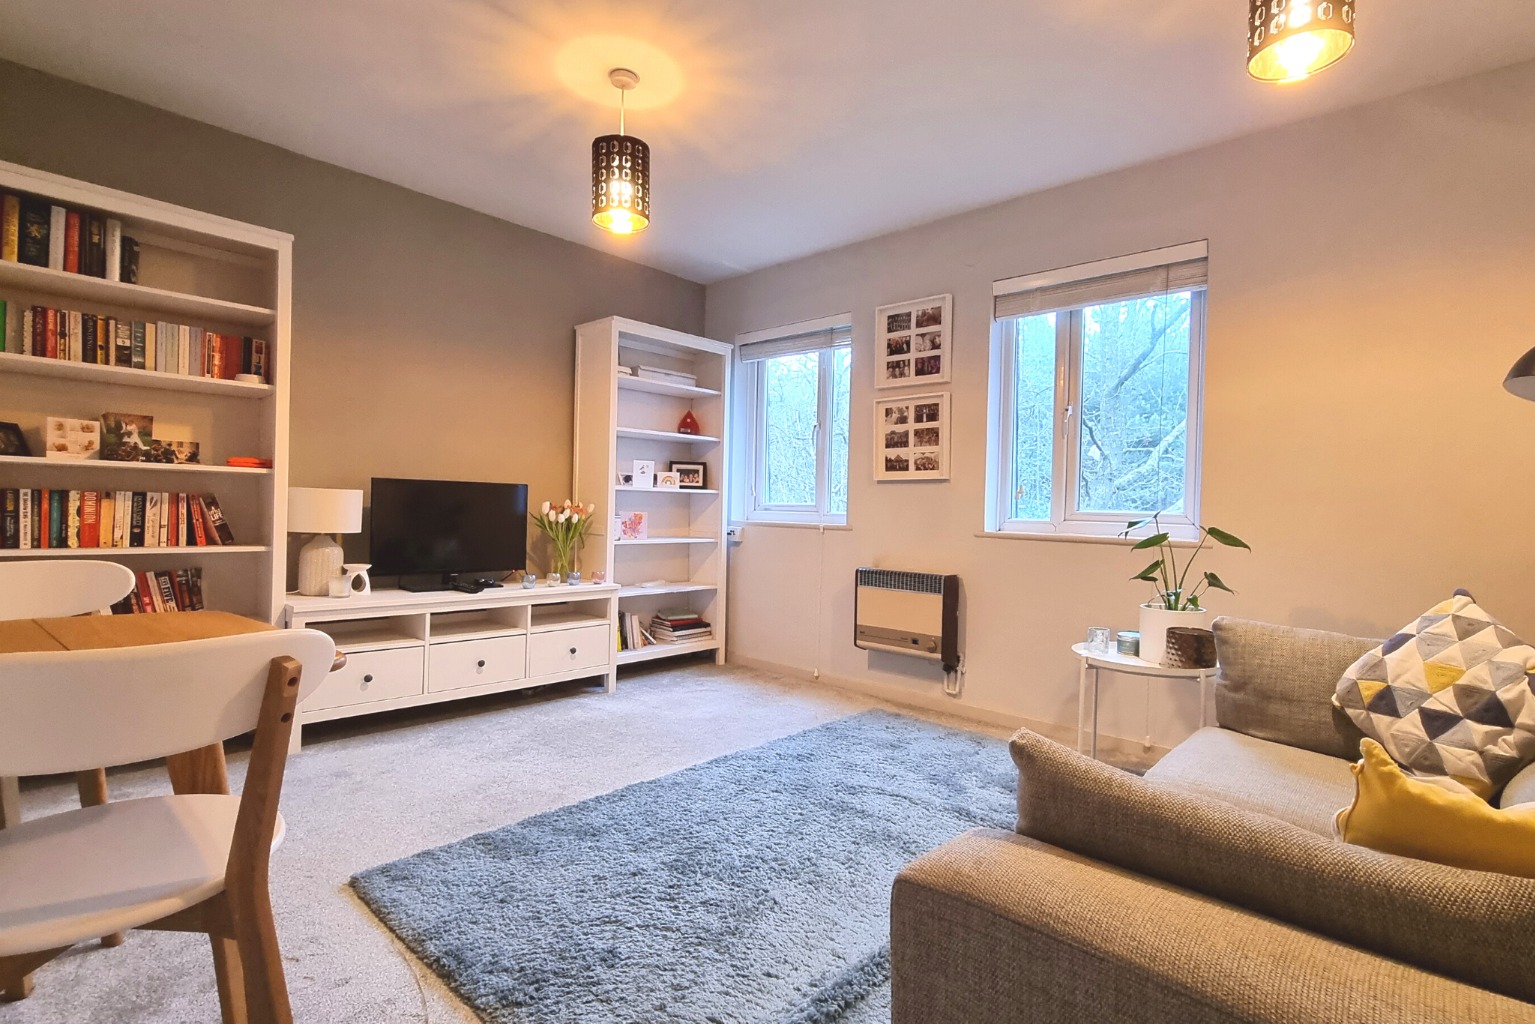 This top floor apartment offers a large double bedroom, family bathroom and a bright lounge/dining area overlooking the woodland behind. This is a great property which we believe is not to be missed.